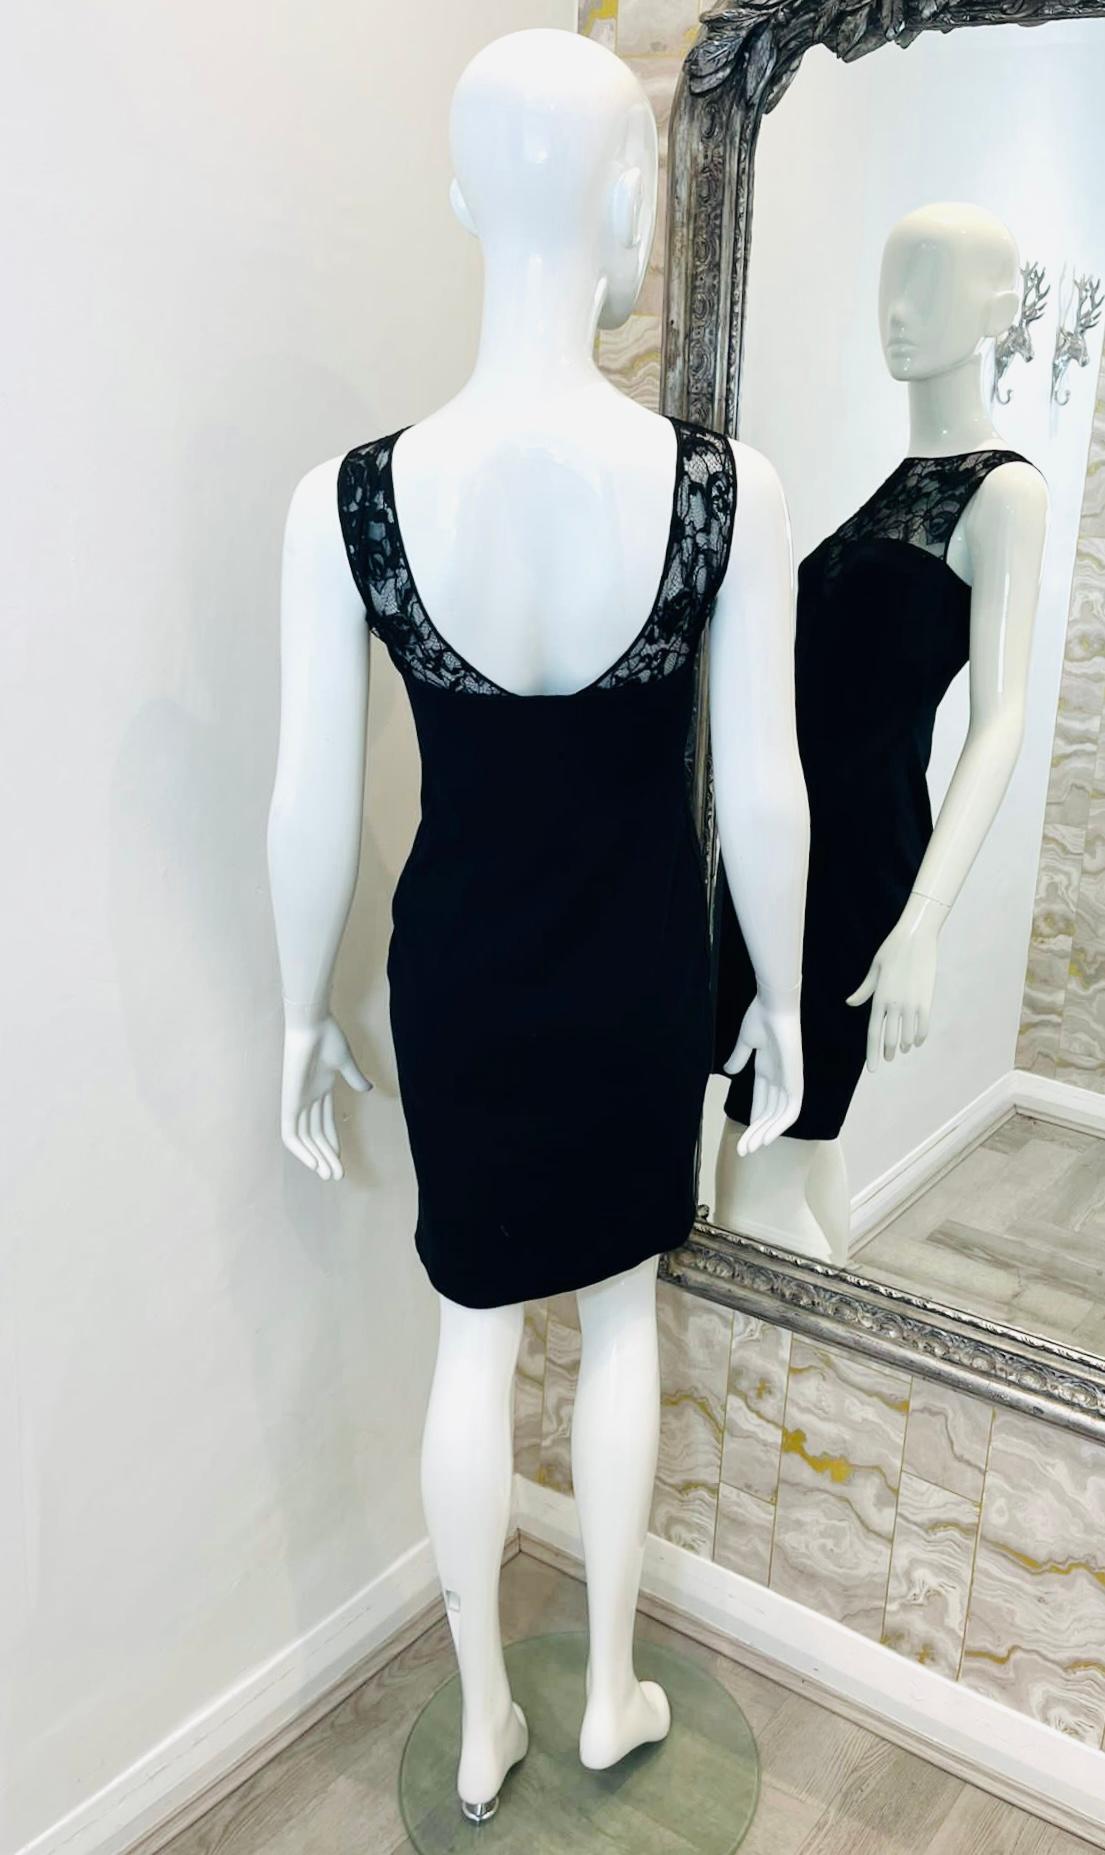 Emilio Pucci Lace Embellished Sheath Dress In Excellent Condition For Sale In London, GB